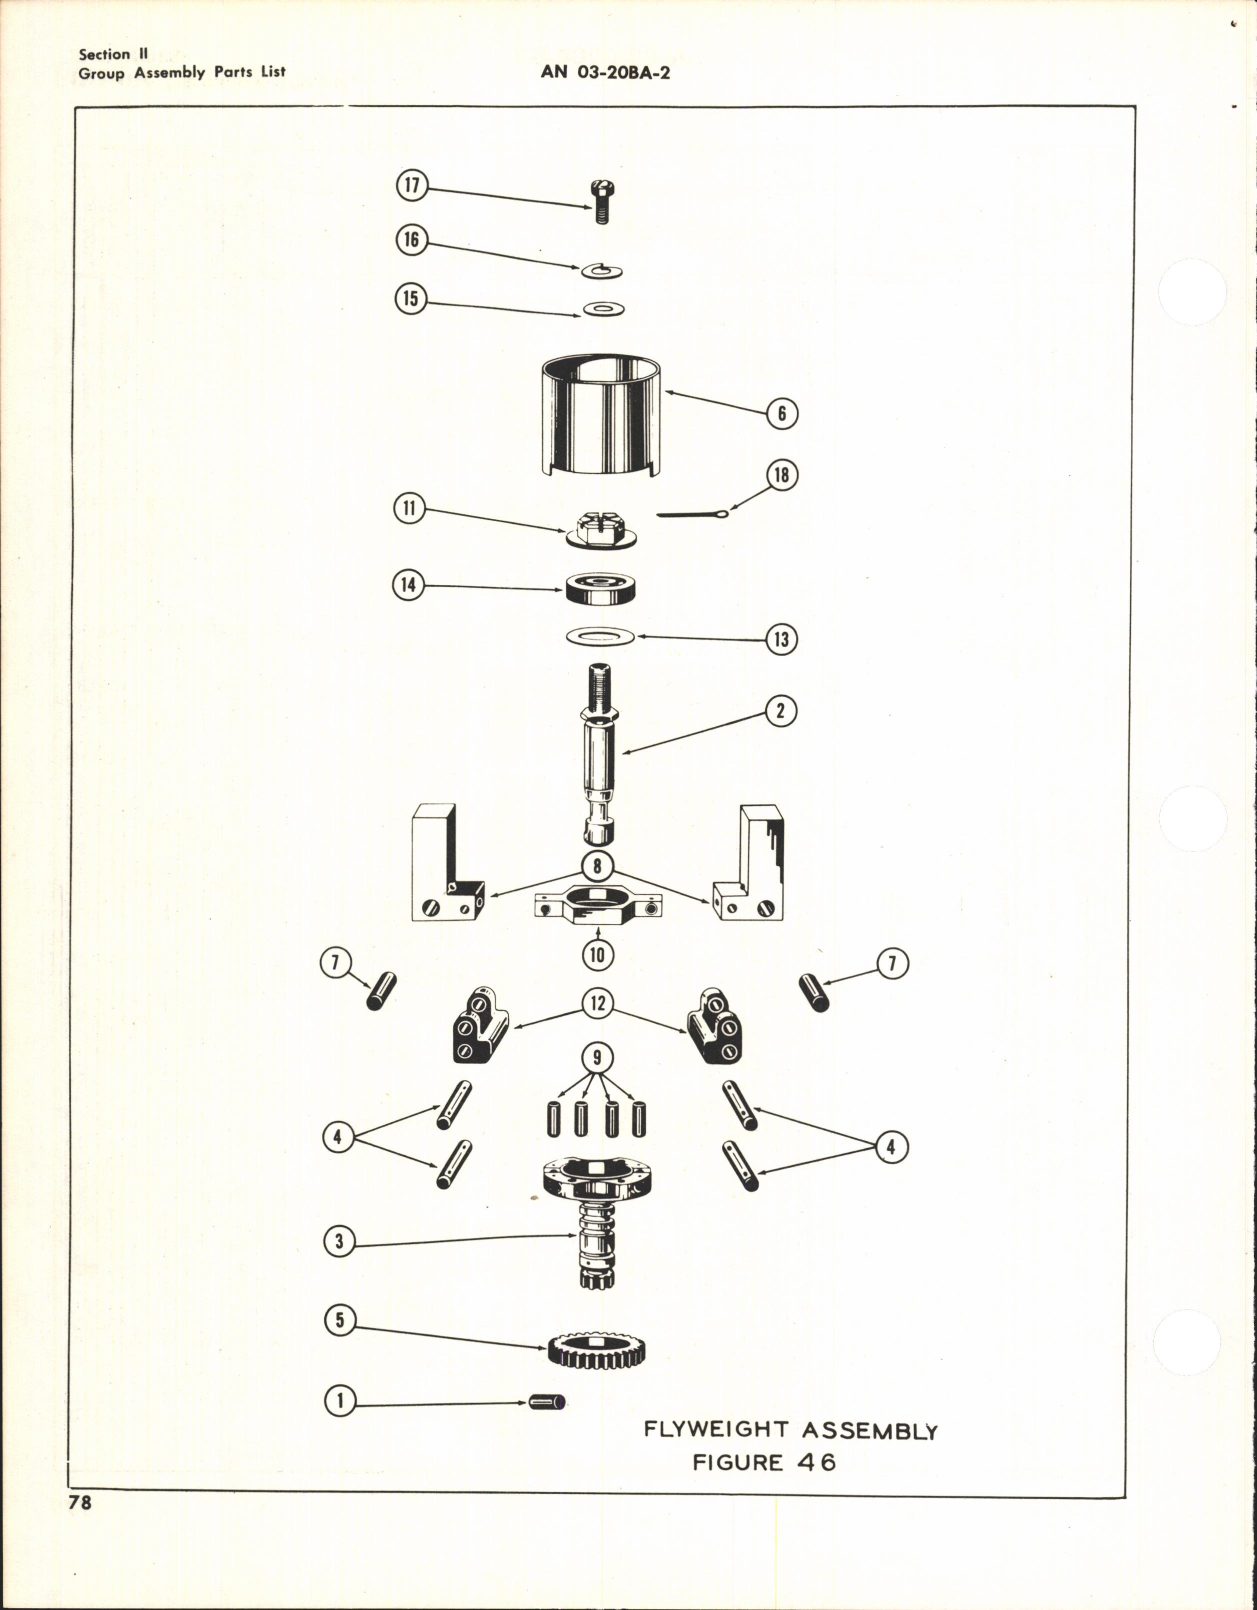 Sample page 8 from AirCorps Library document: Parts Catalog for Electric Propeller Governor and Propeller Controls